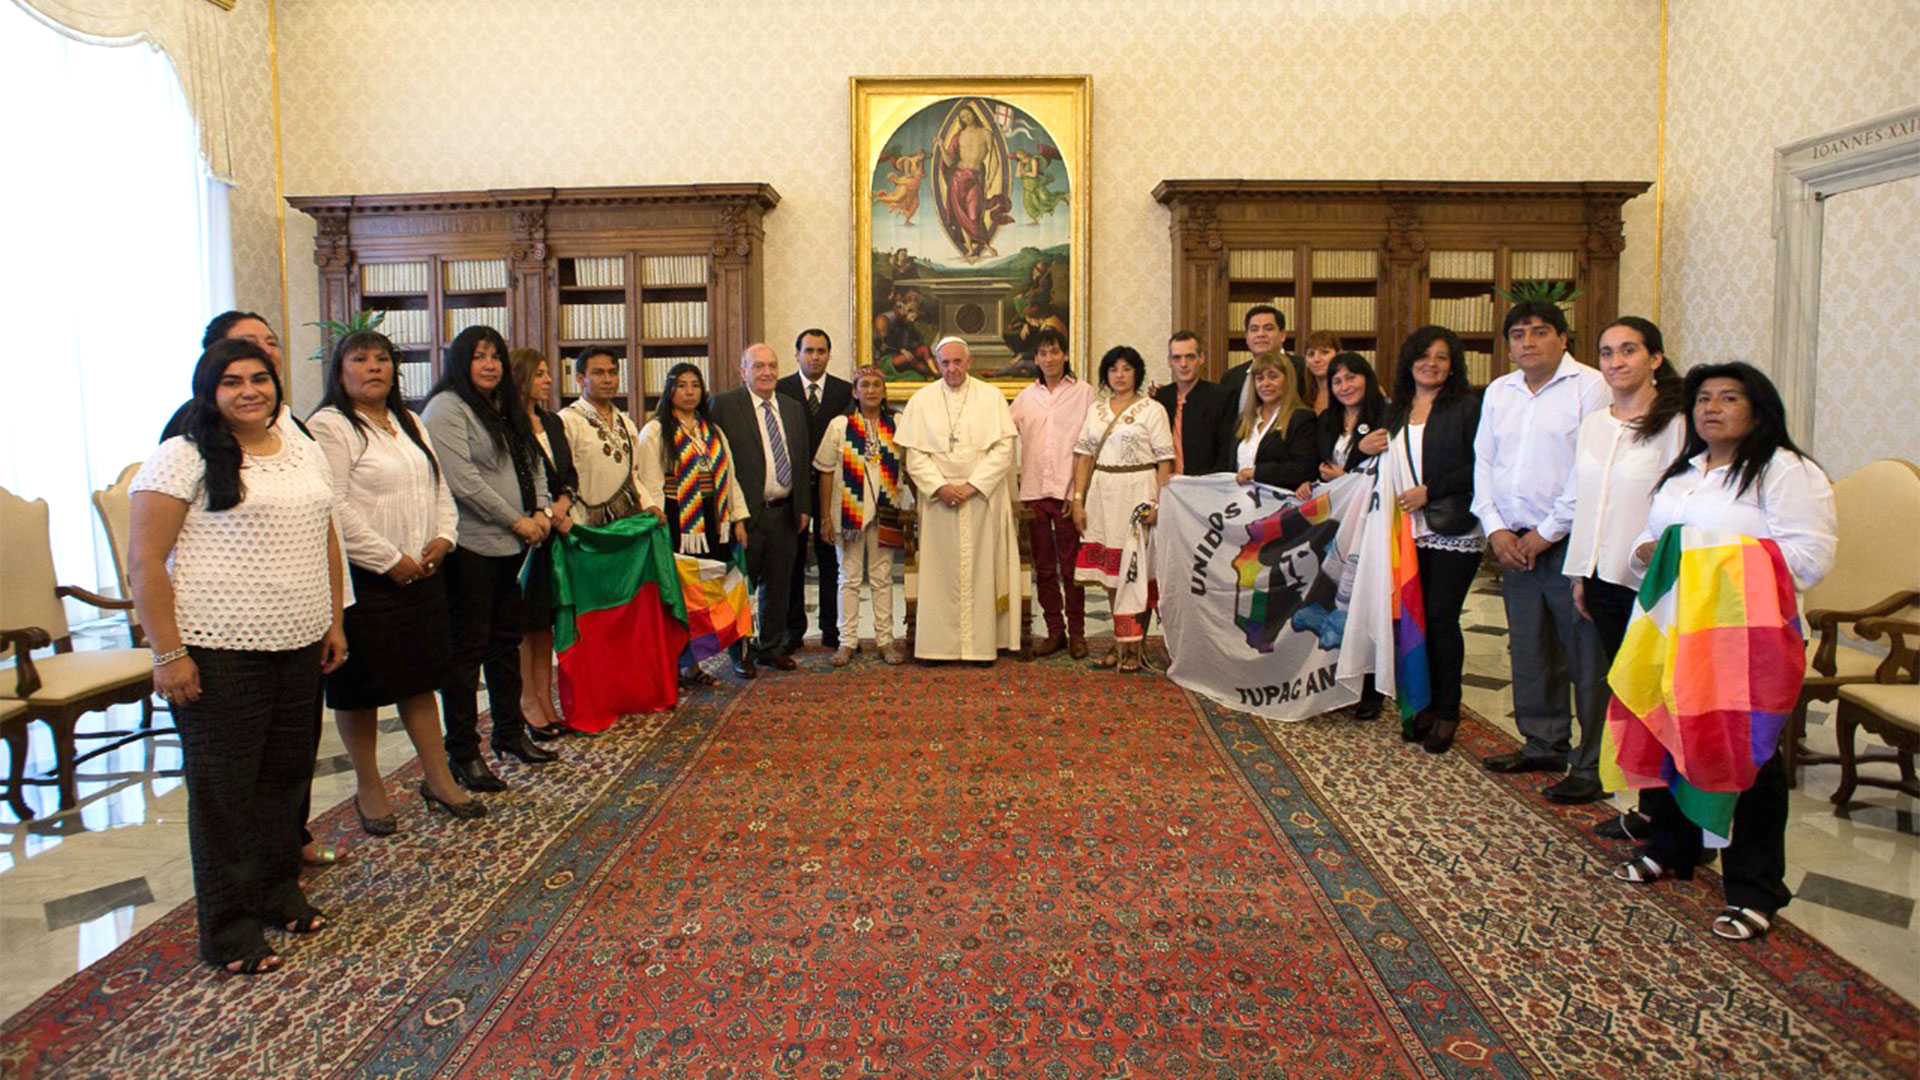 Pope Francis with Milagro Sala and a delegation of members of the Tupac Amaru in the Vatican (archive photo)